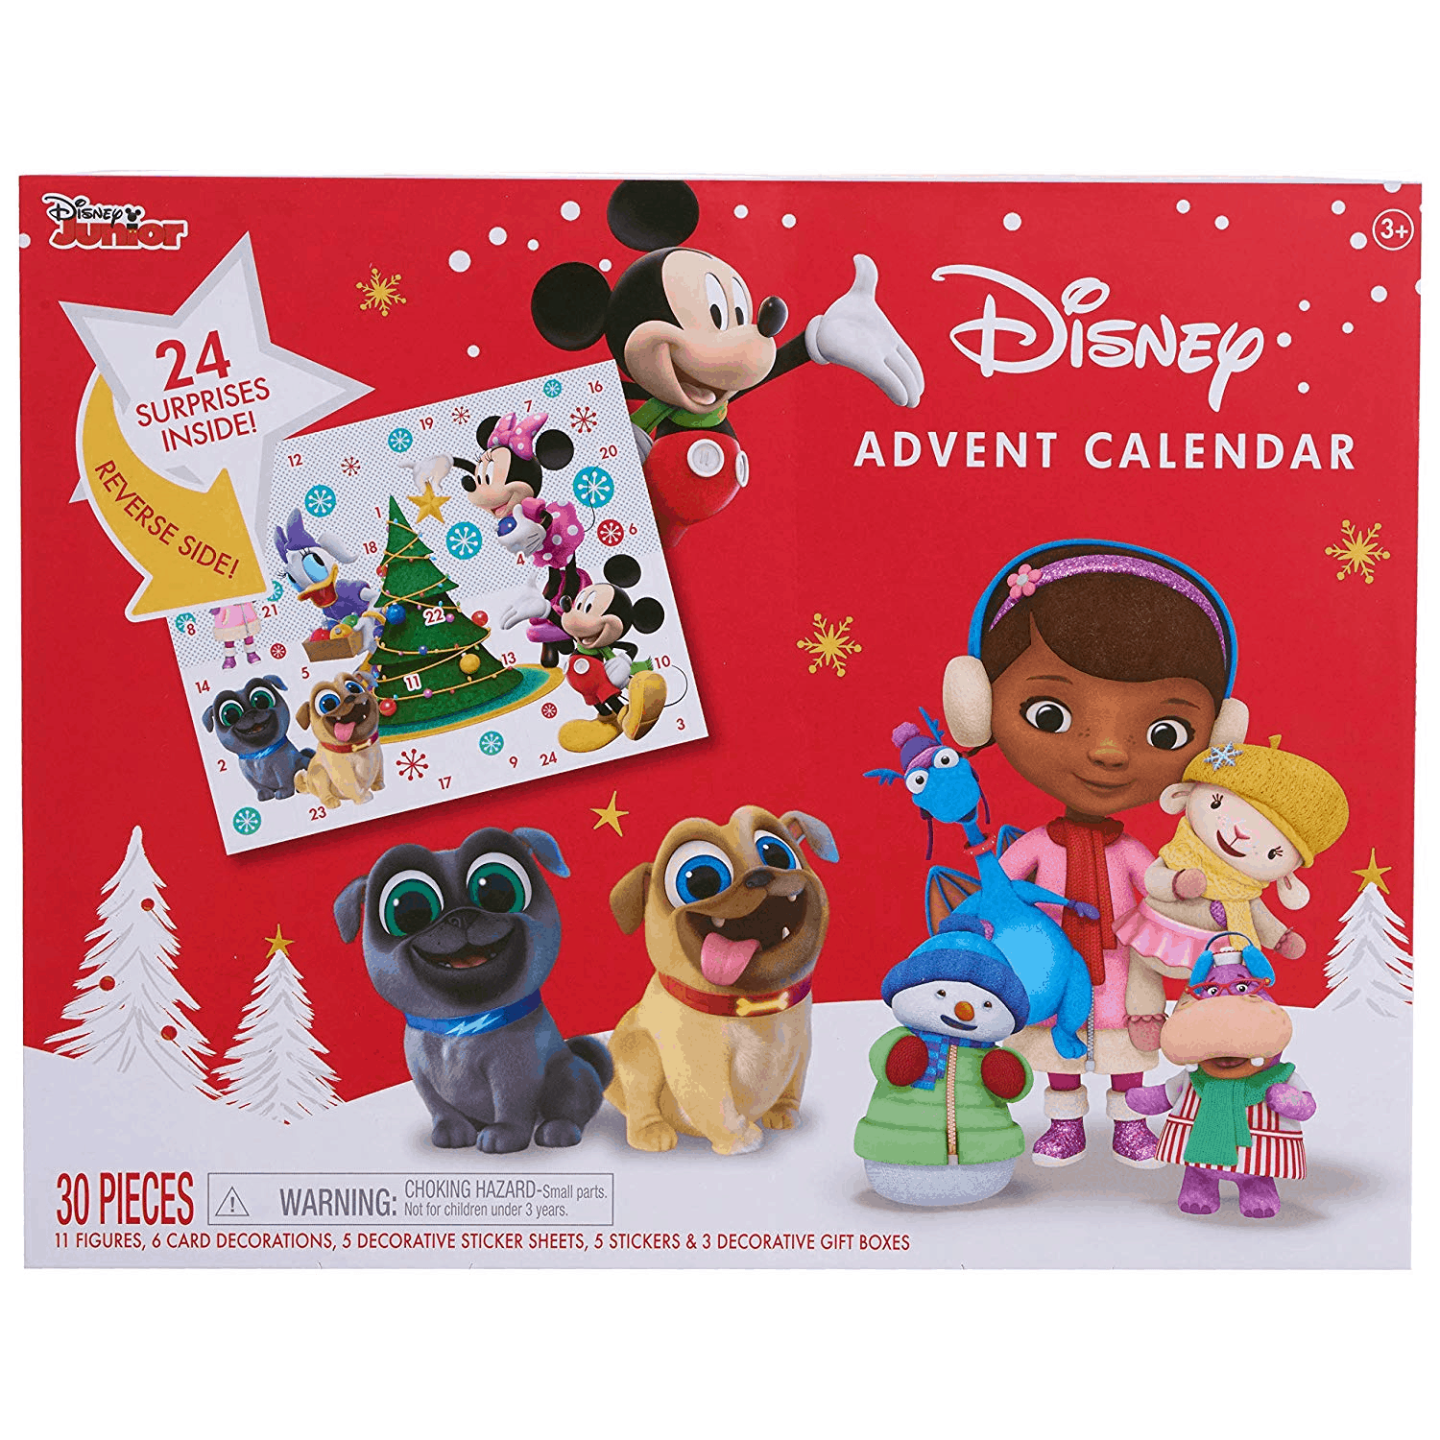 Two New 2019 Disney Advent Calendars Available Now! Hello Subscription